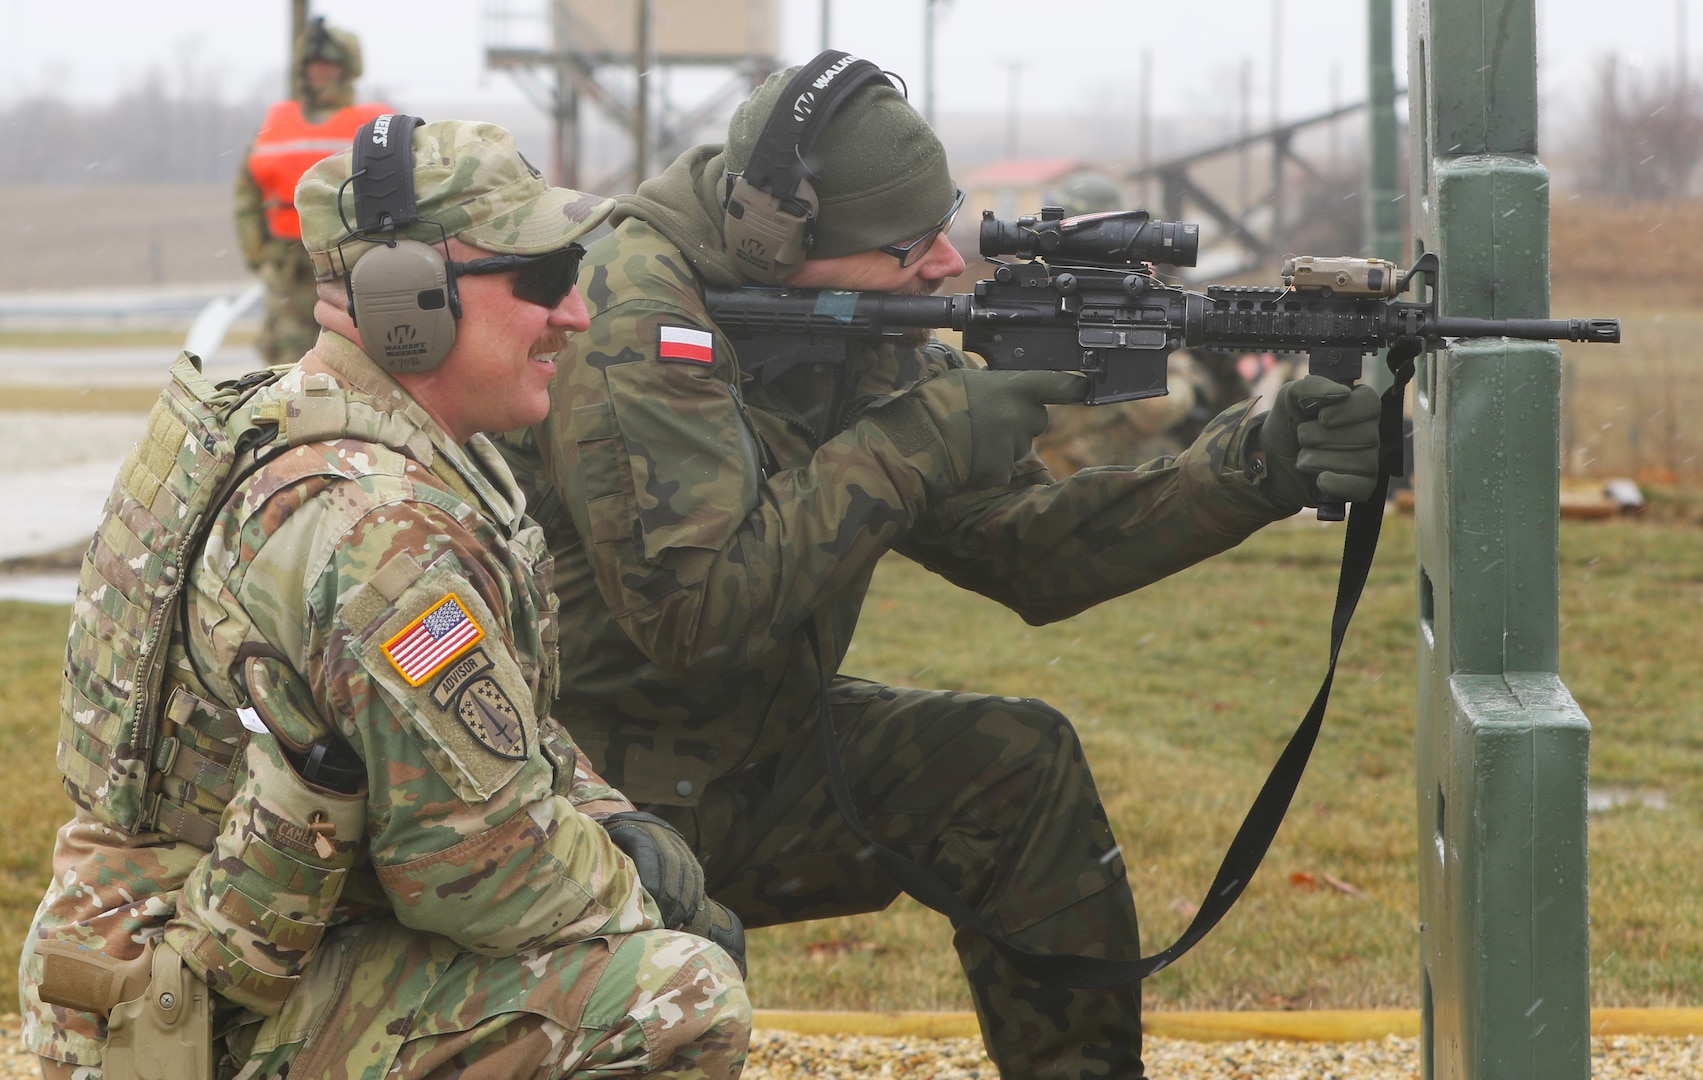 Illinois Army National Guard Capt. Drew Weaver discusses the firing of the M-4 with Maj. Andrew Majcherek of the Polish Territorial Defense Force on the range at the Illinois Army National Guard's Marseilles Training Area. Weaver was one of four Illinois National Guard Soldiers awarded the bronze Polish Armed Forces Medal on March 25, 2023, for their work training Polish Territorial Defense Force Soldiers in Poland in May and June 2022.